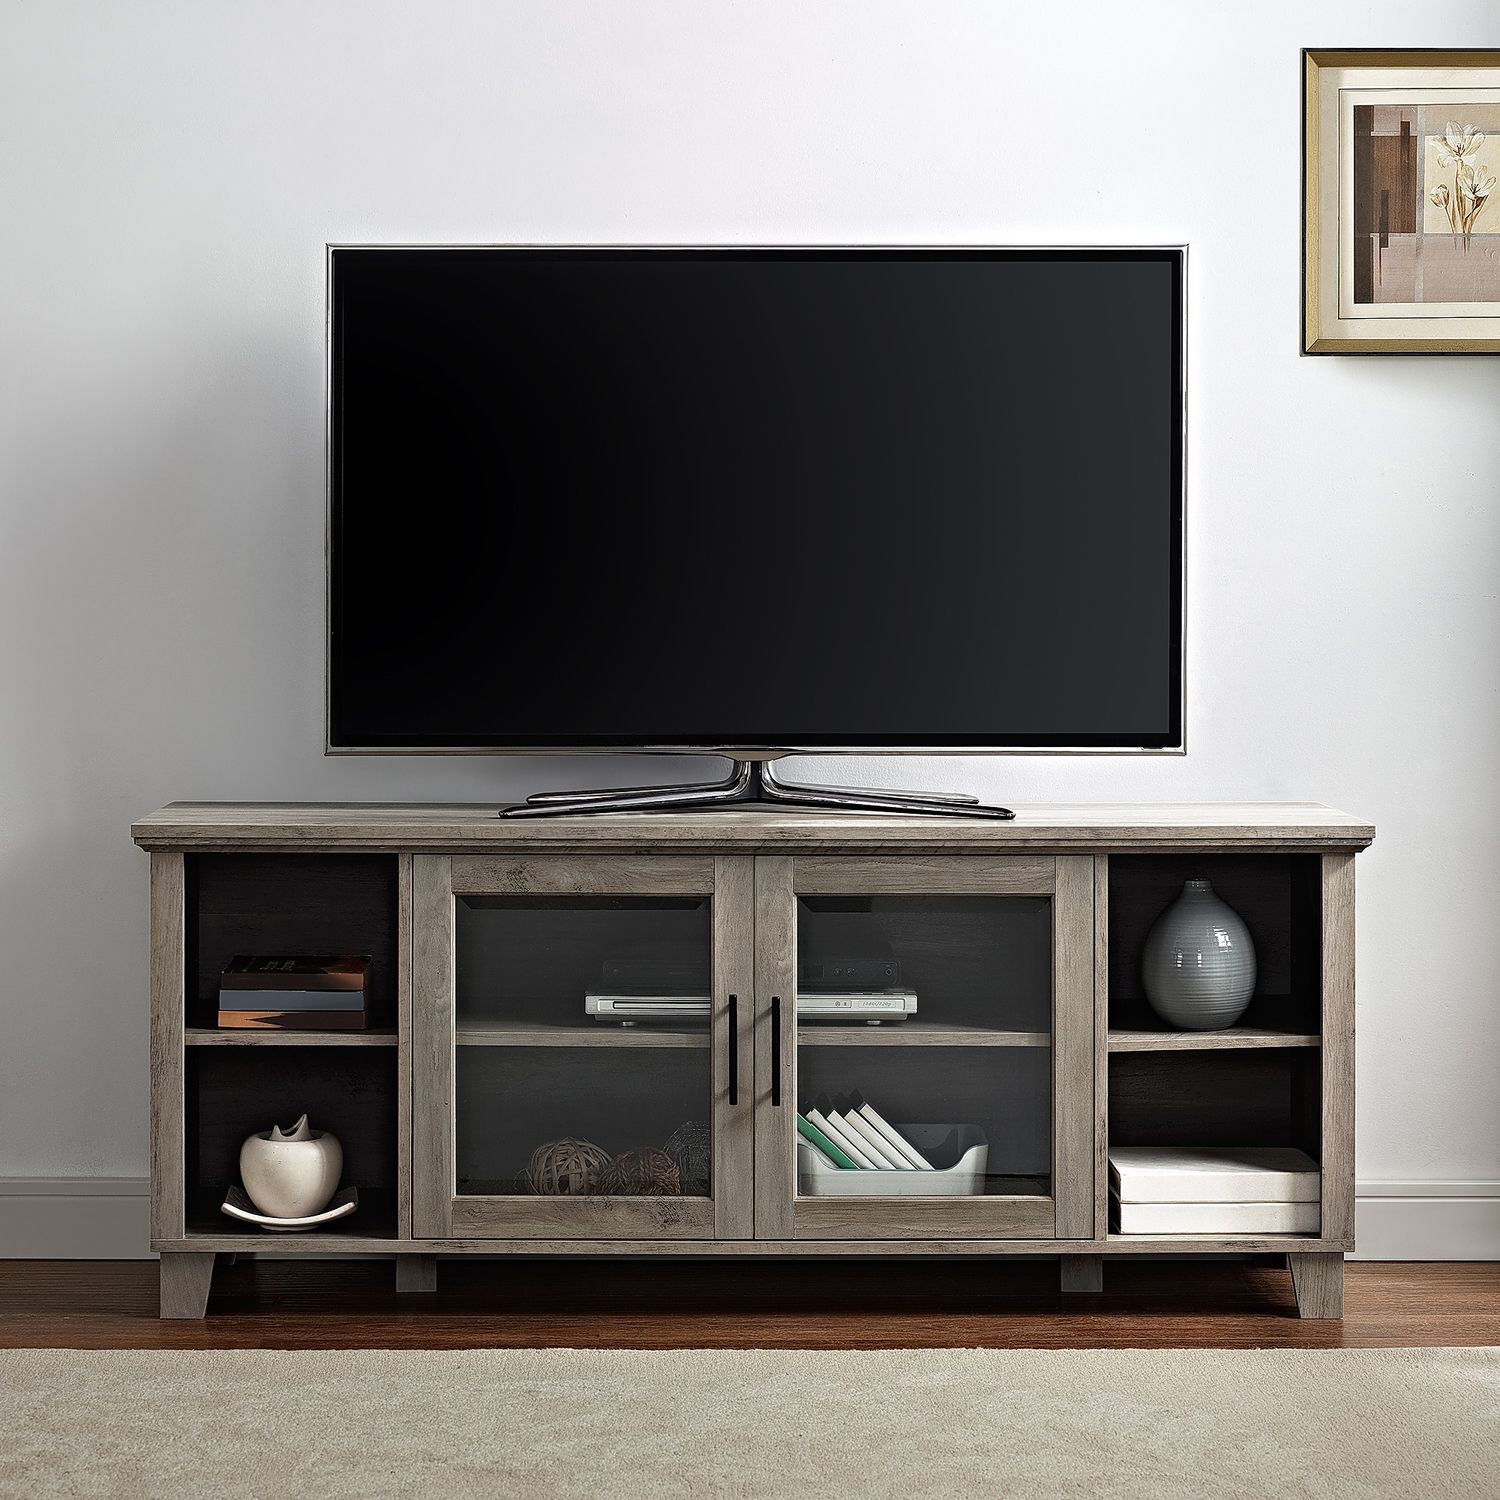 Traditional Tv Stand With Glass Doors – Pier1 Inside Traditional Tv Cabinets (View 4 of 15)